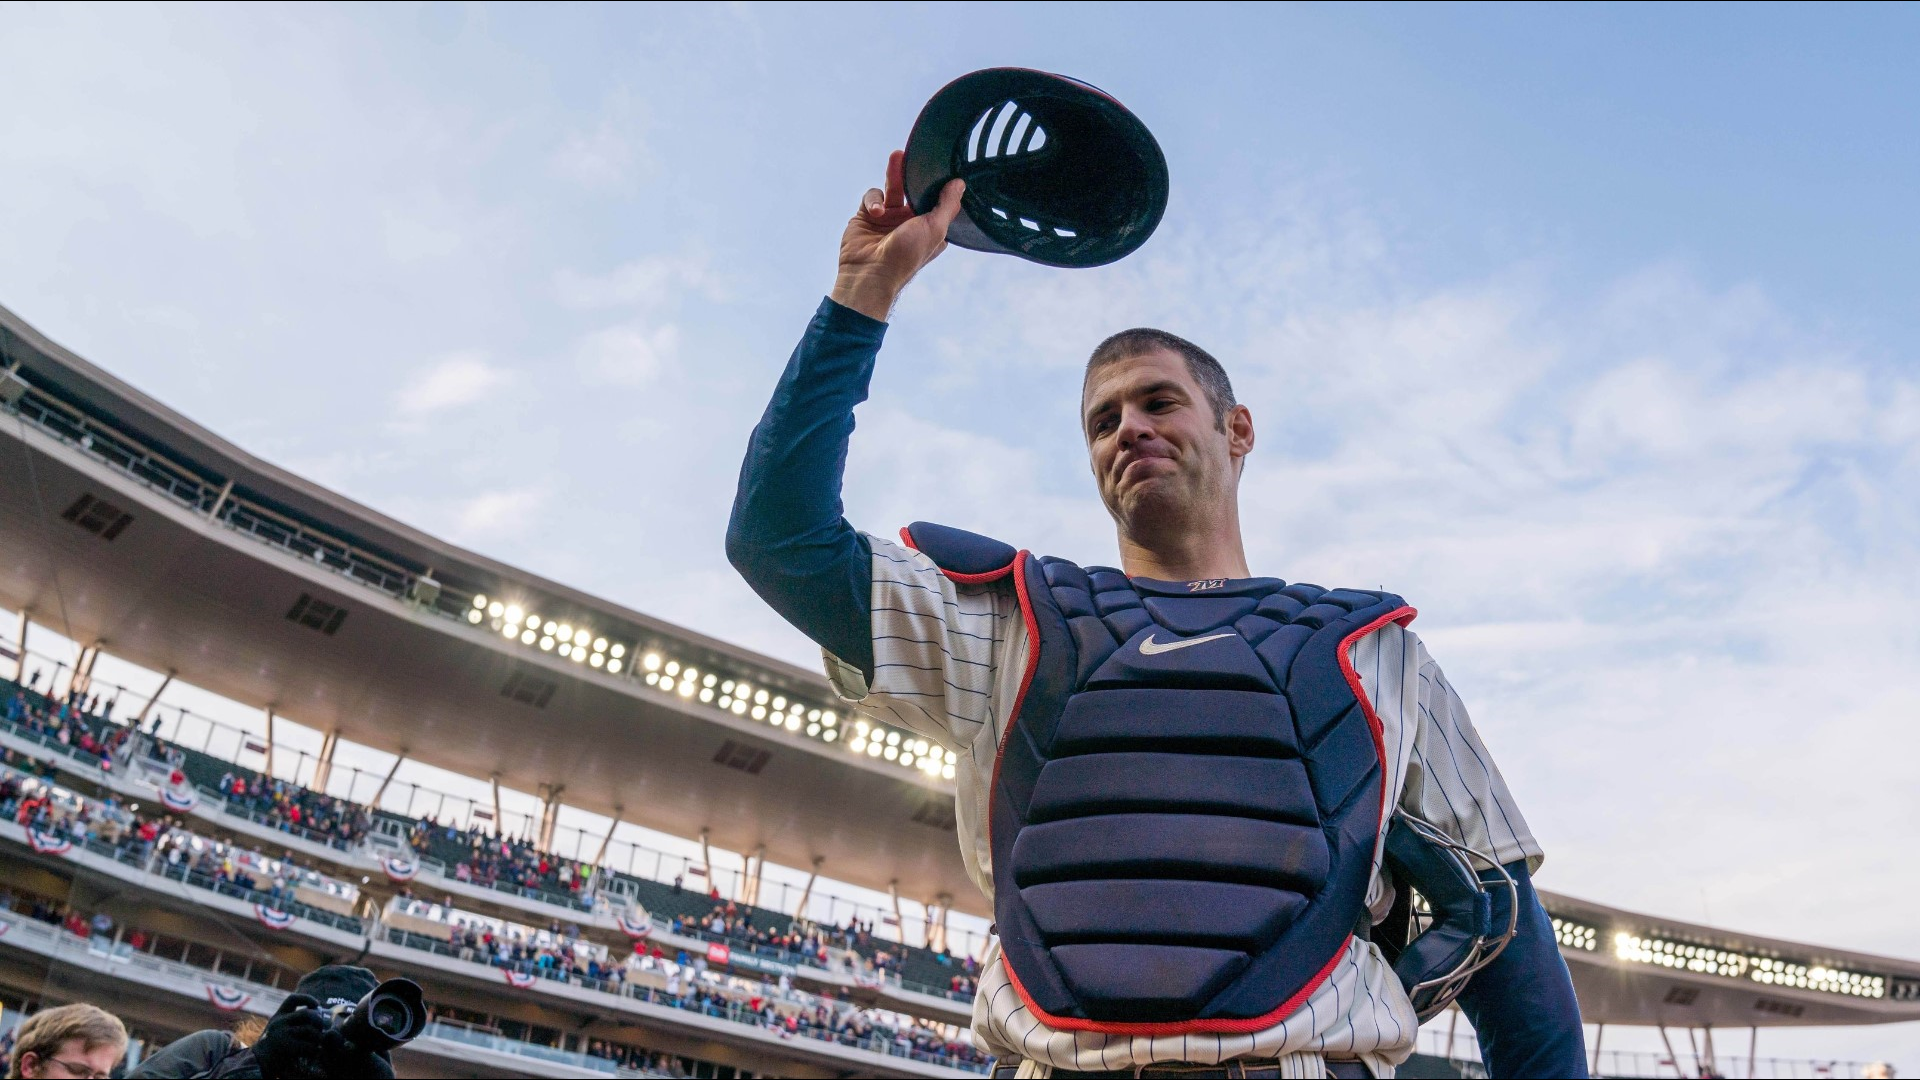 On Saturday, Joe Mauer will become the 38th player to go into the team's Hall of Fame.